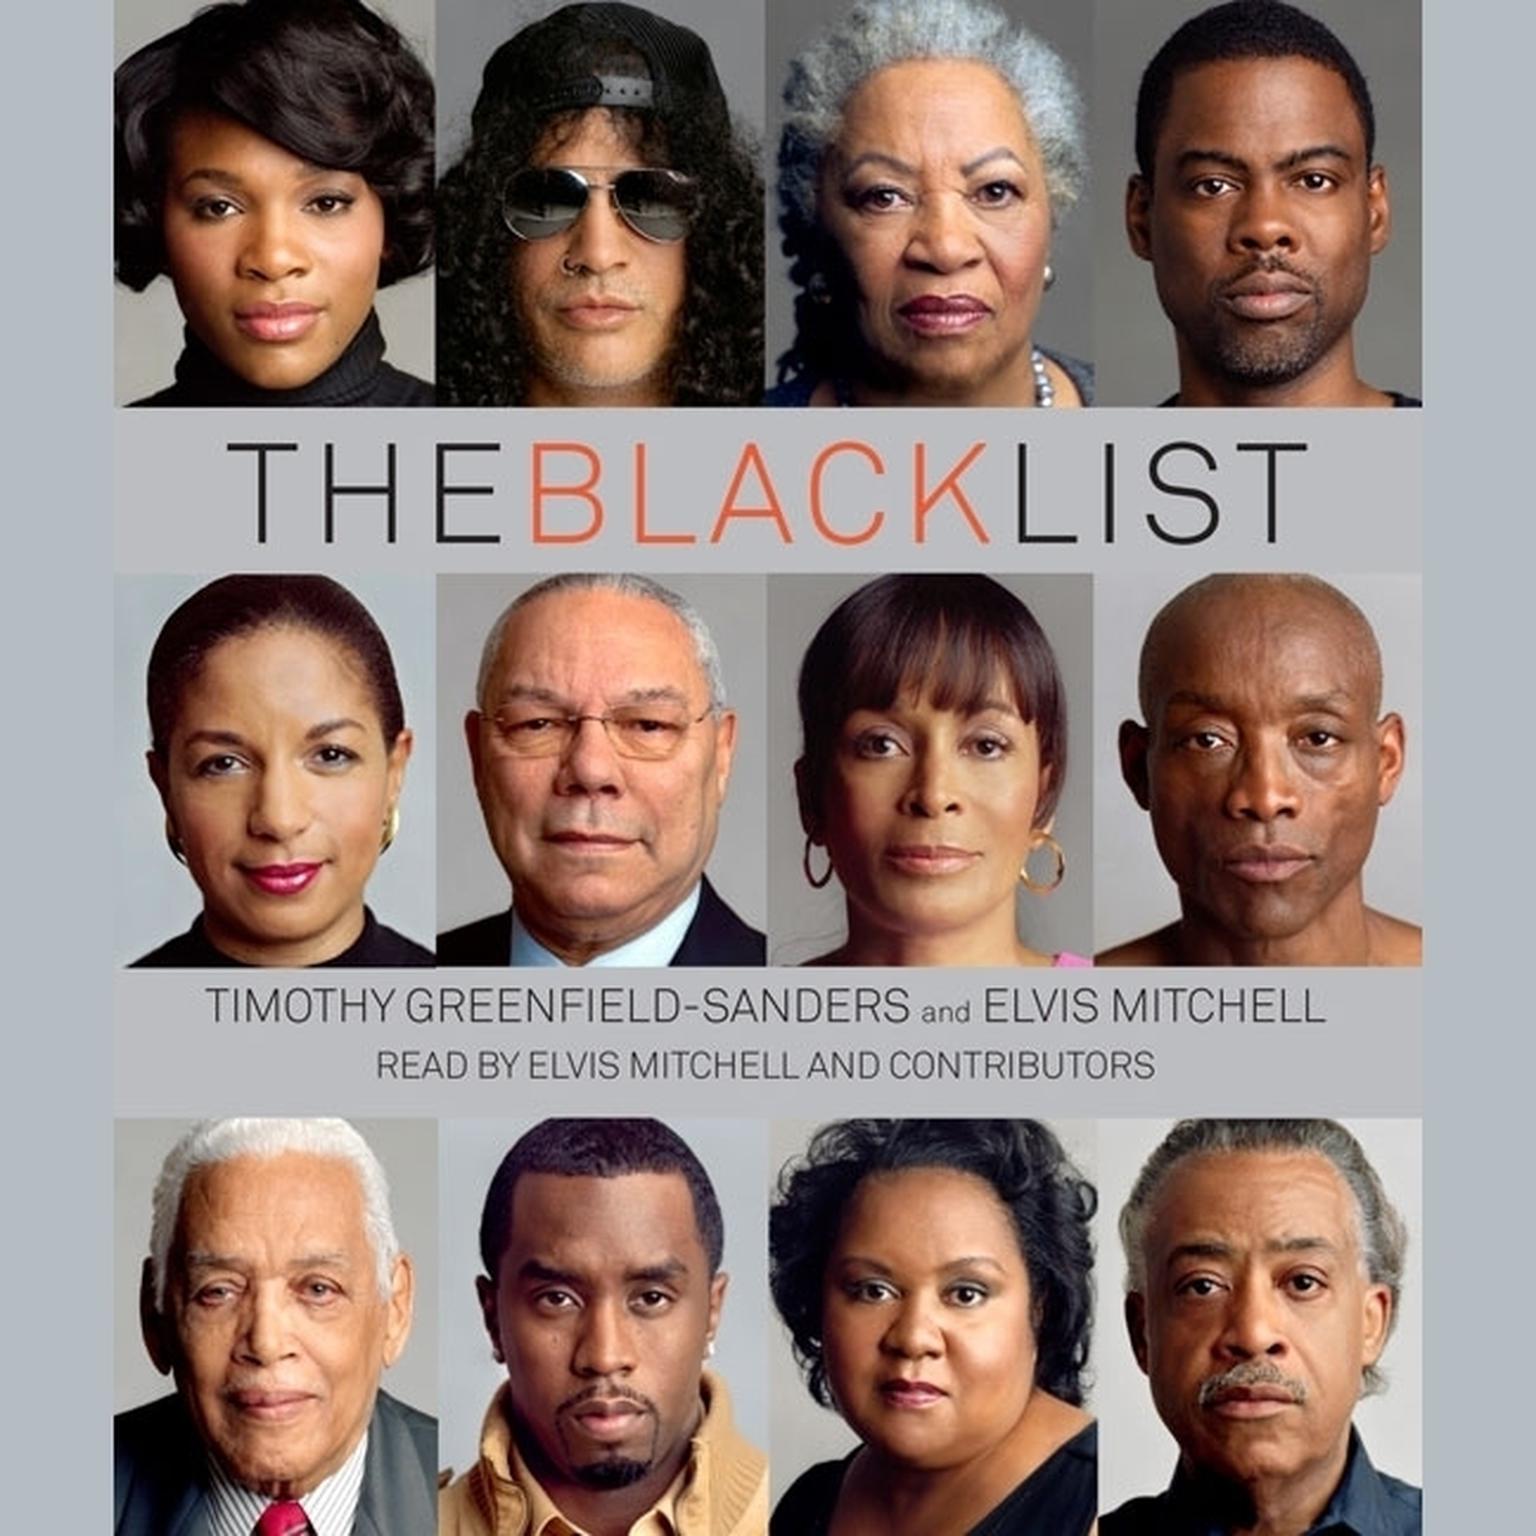 The Black List (Abridged) Audiobook, by Timothy Greenfield-Sanders